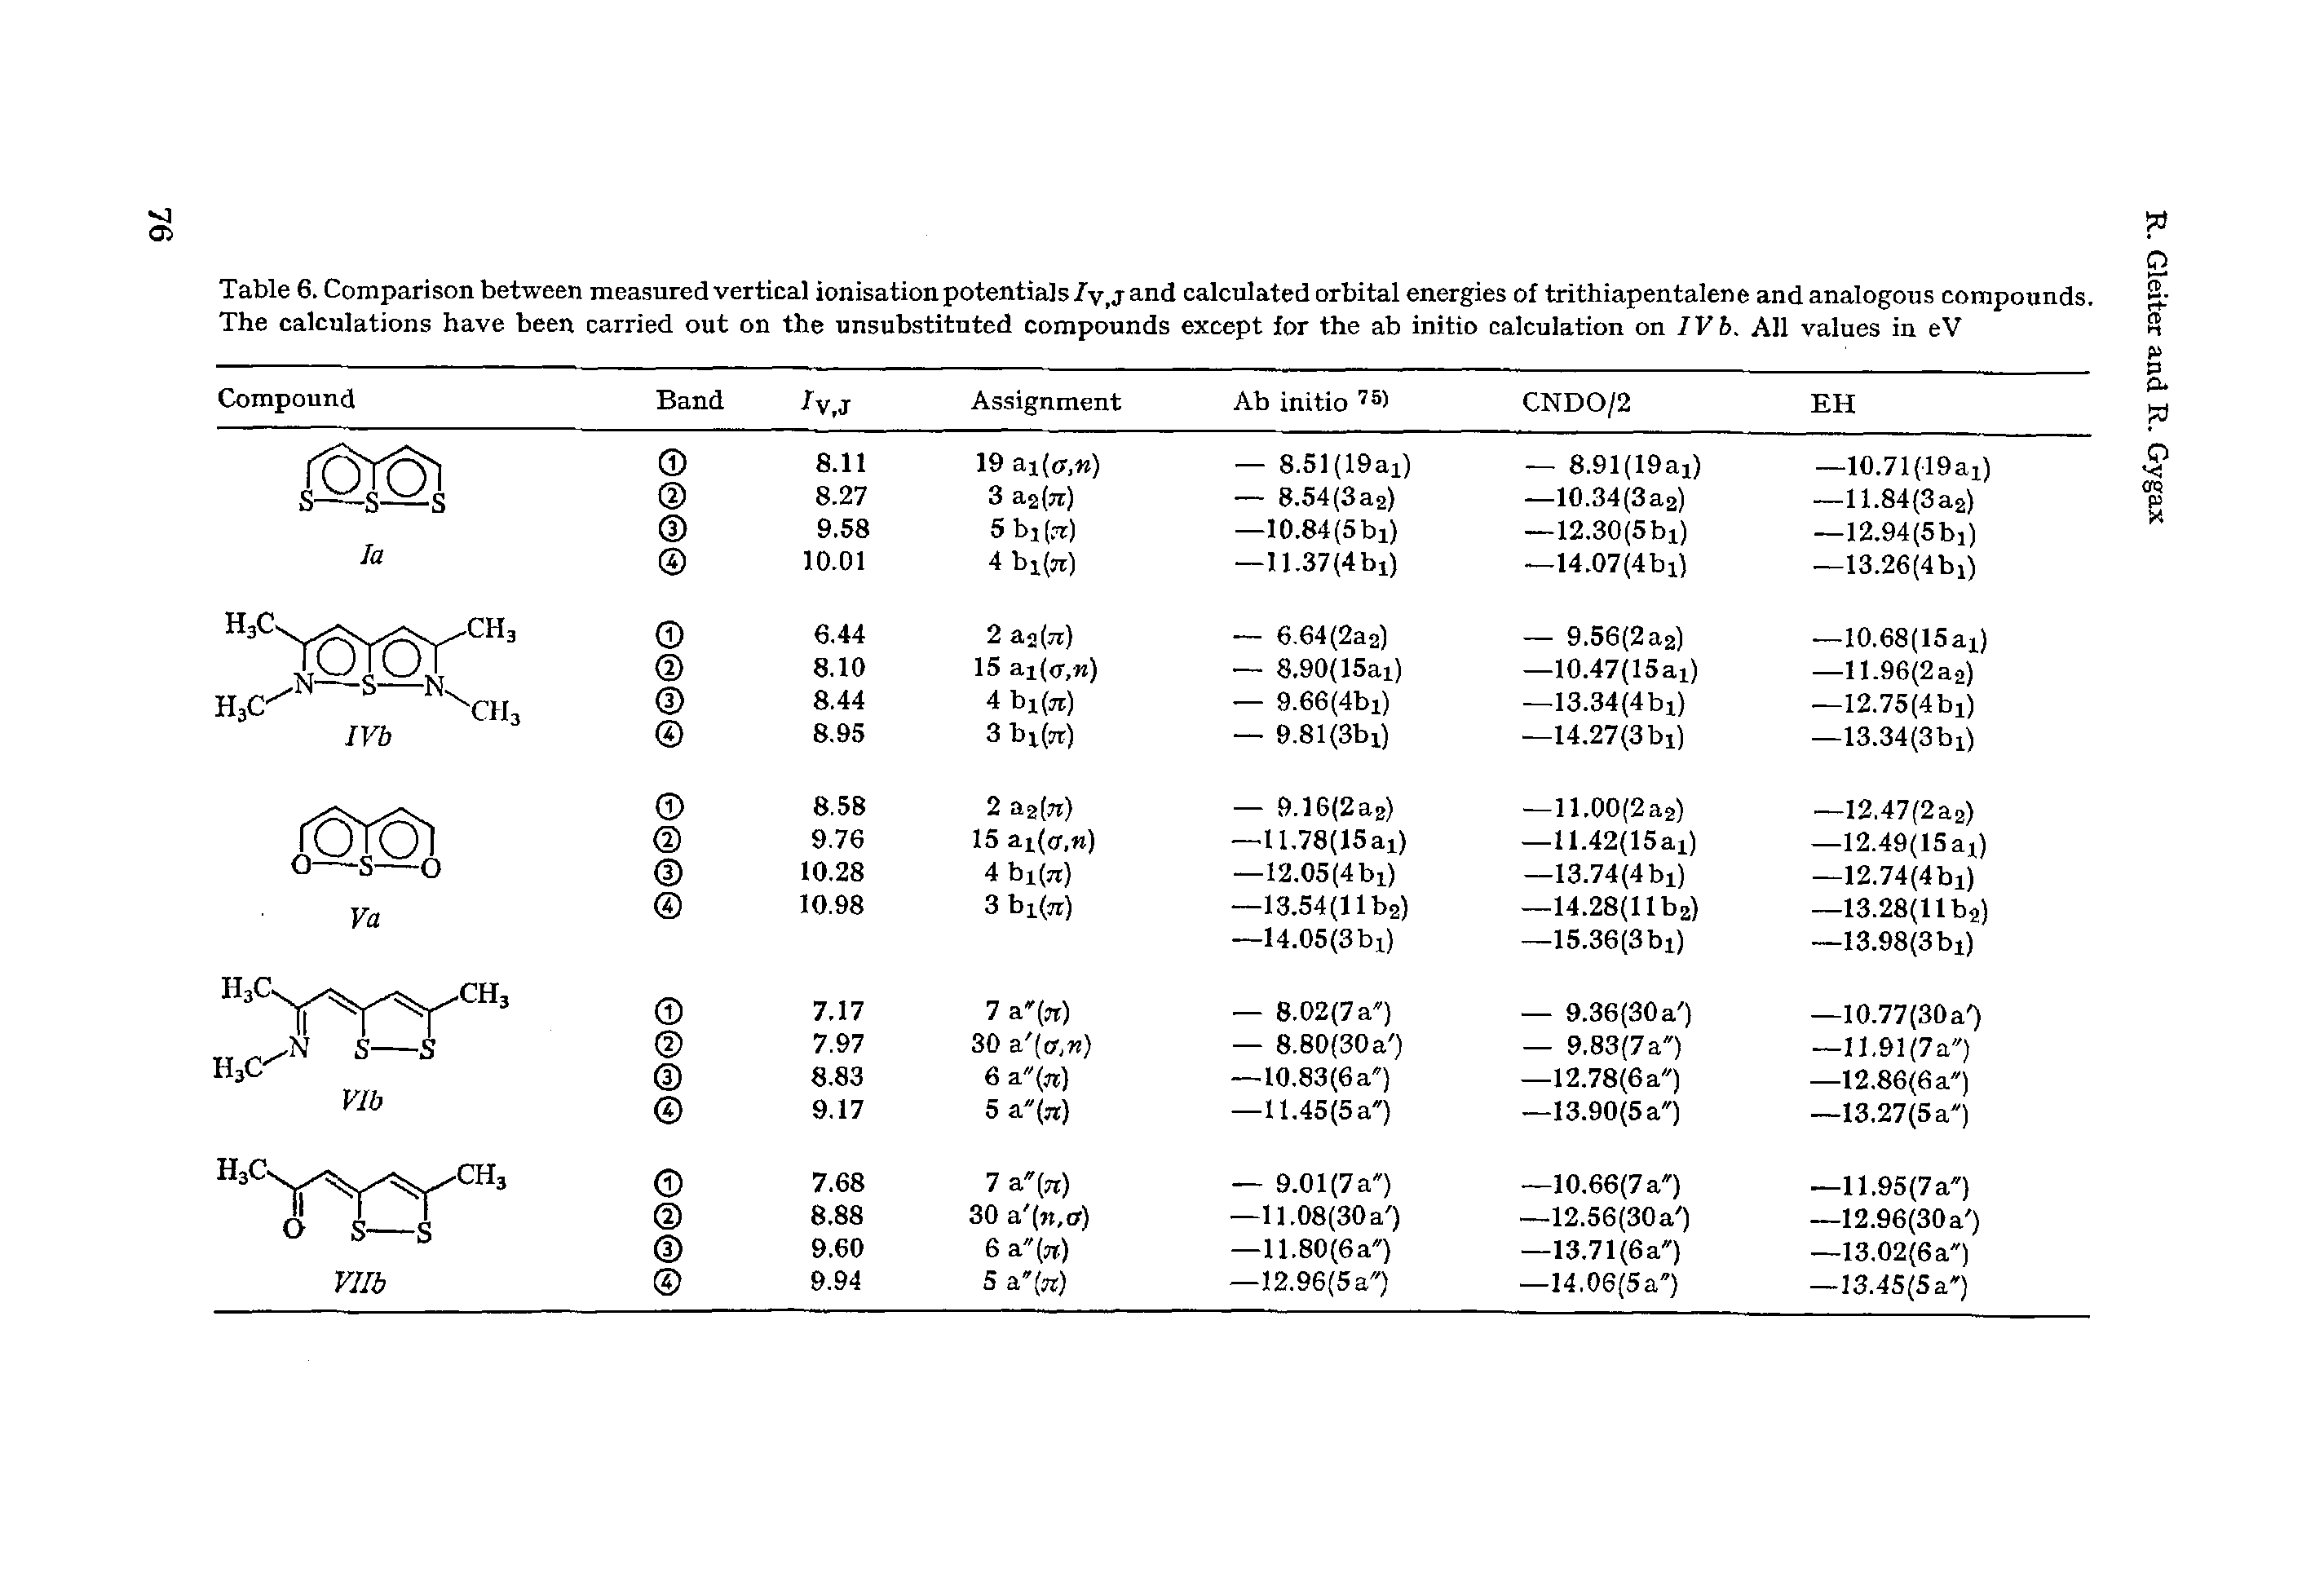 Table 6. Comparison between measured vertical ionisation potentials/v,j and calculated orbital energies of trithiapentalene and analogous compounds. The calculations have been carried out on the unsubstituted compounds except for the ab initio calculation on IVh. All values in eV...